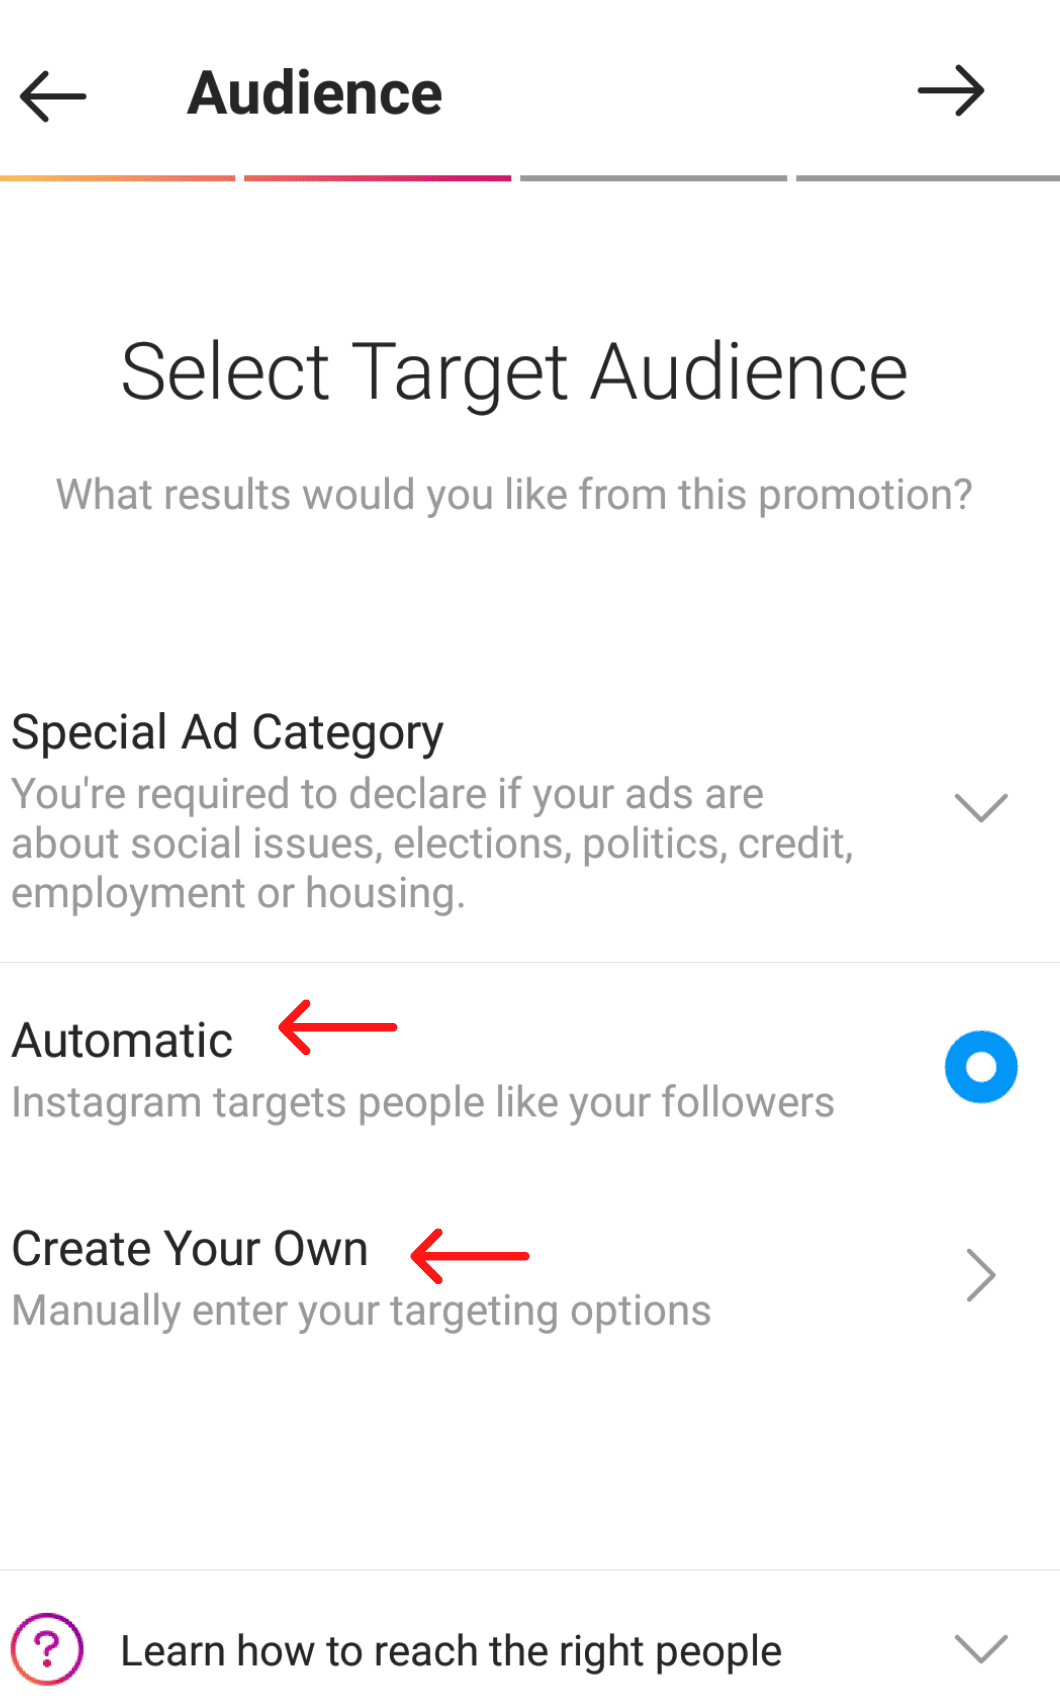 Select Target Audience